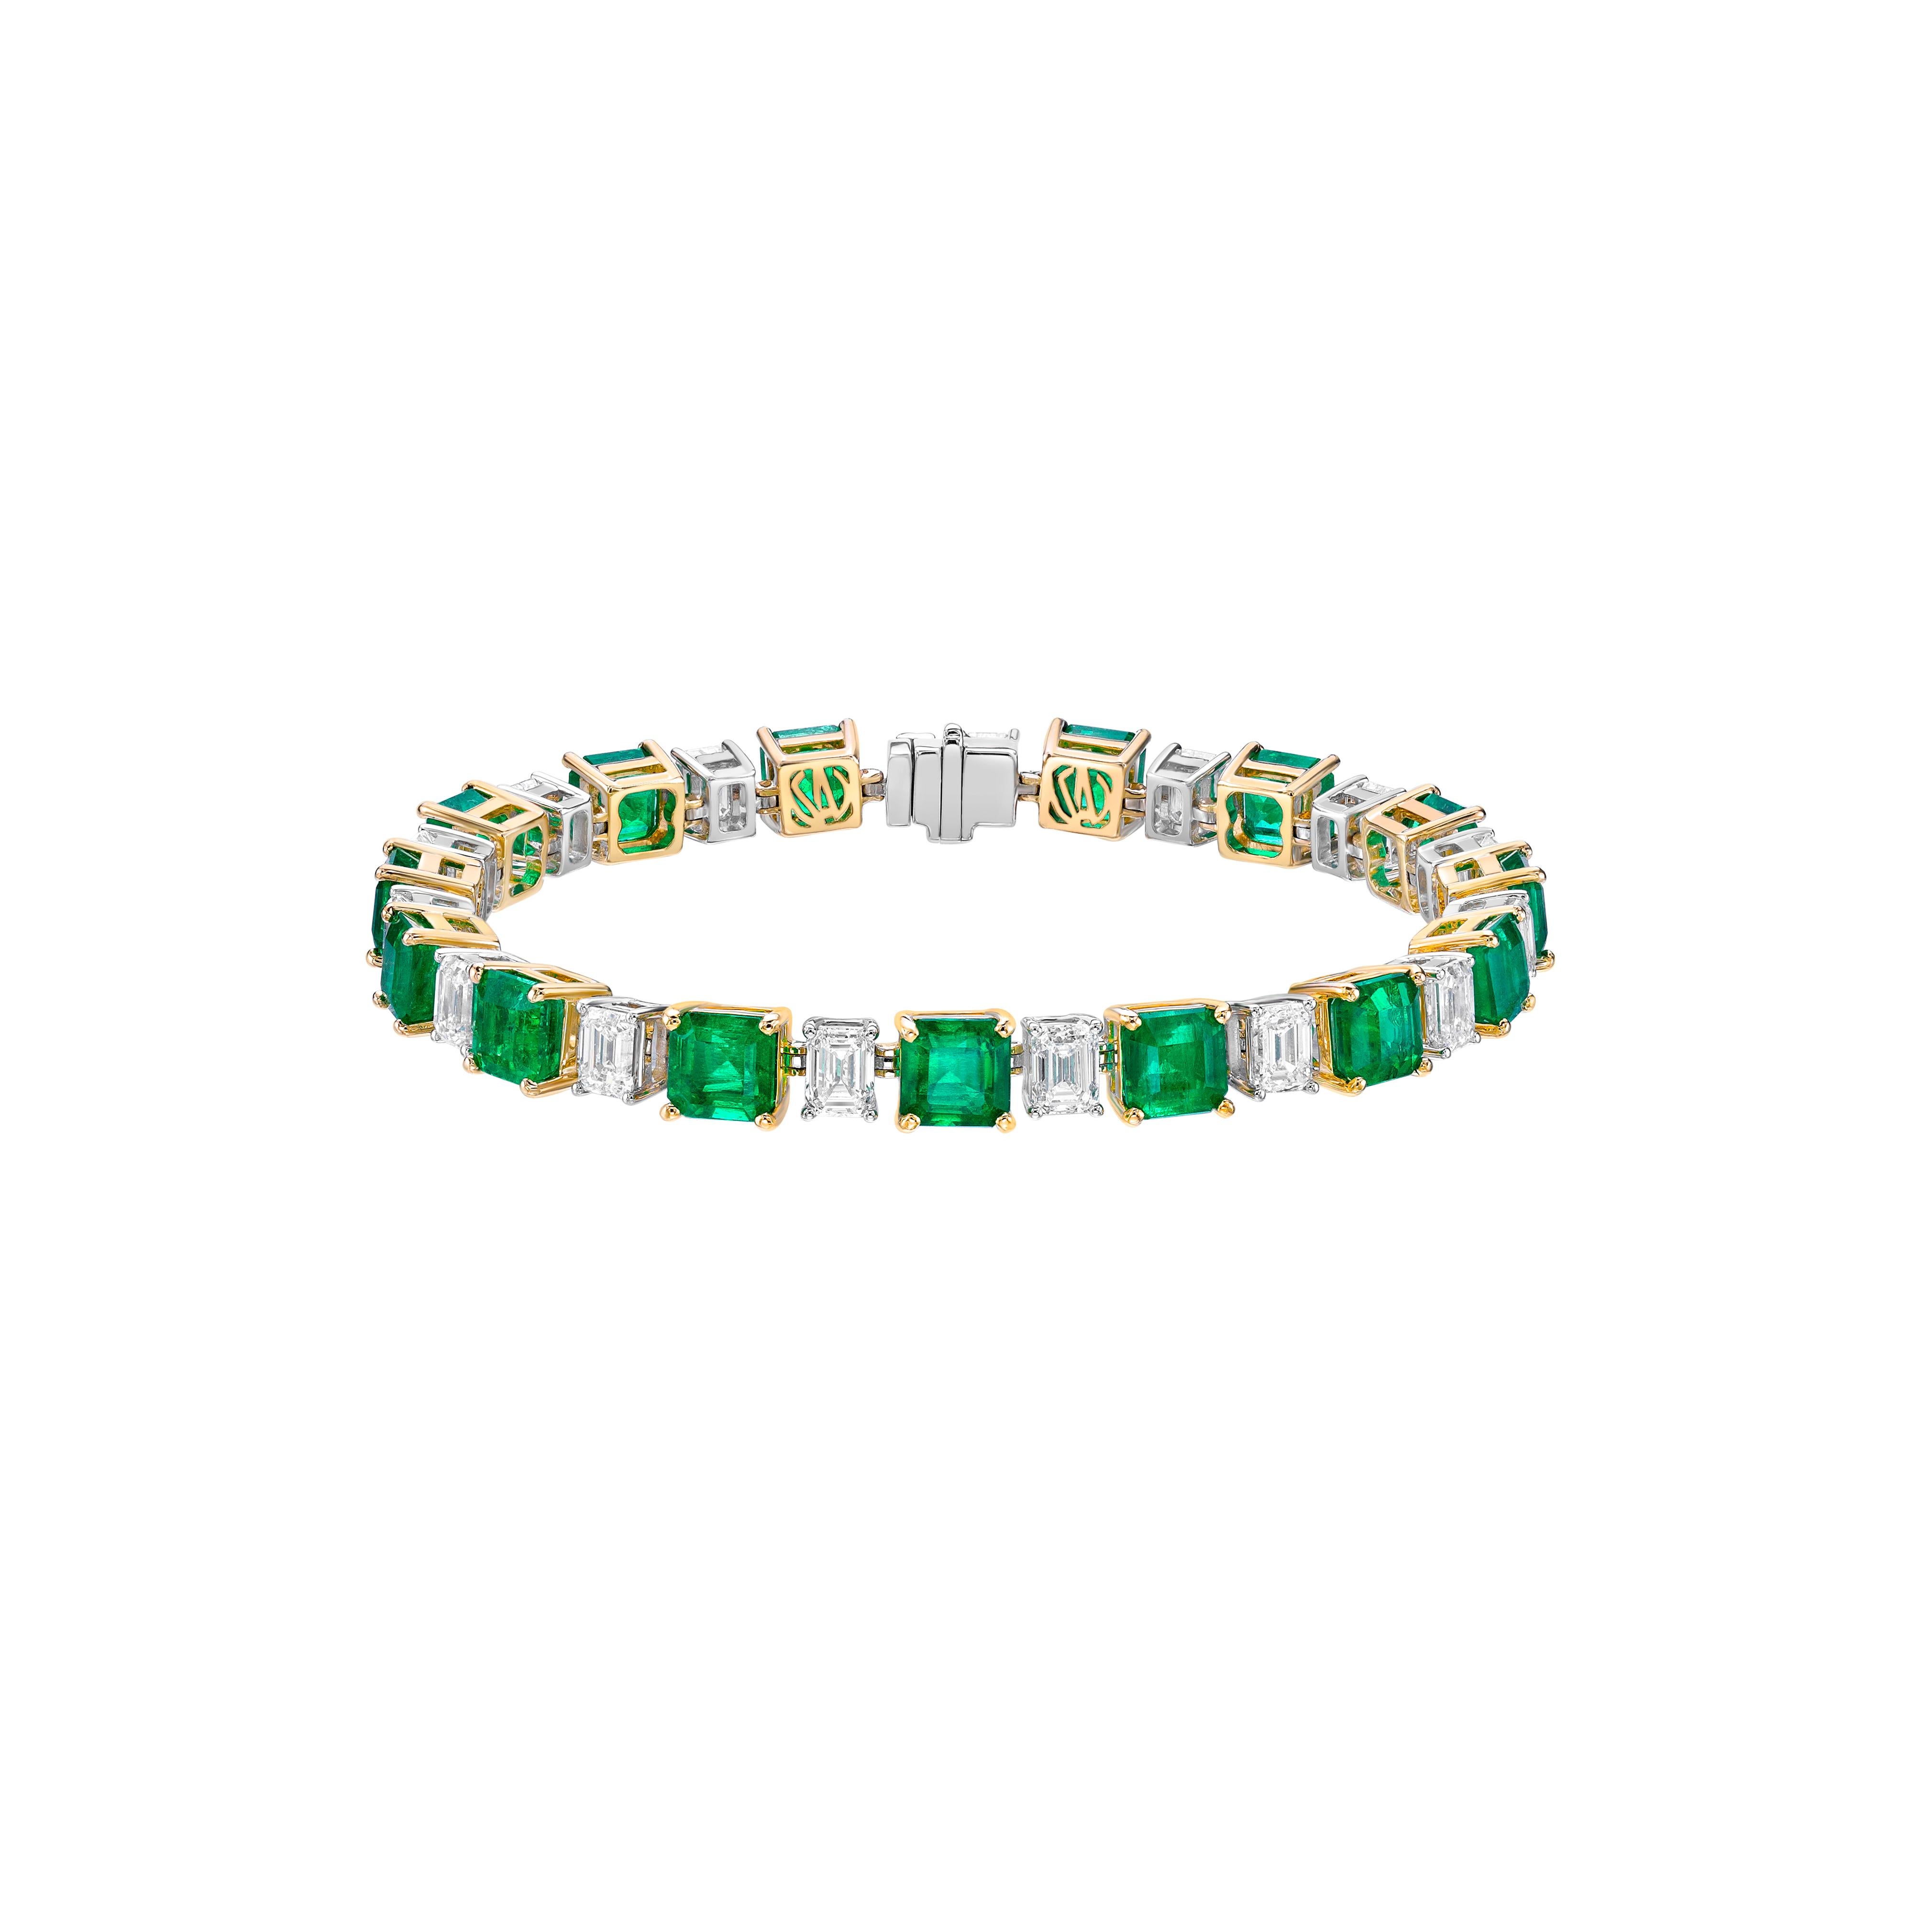 Presenting a sophisticated and classic Colombian Emerald Tennis Bracelet. Classic and timeless by Sunita Nahata Fine Design. Perfectly calibrated with the finest gems and diamonds this is an investment piece that showcases the beauty of the finest